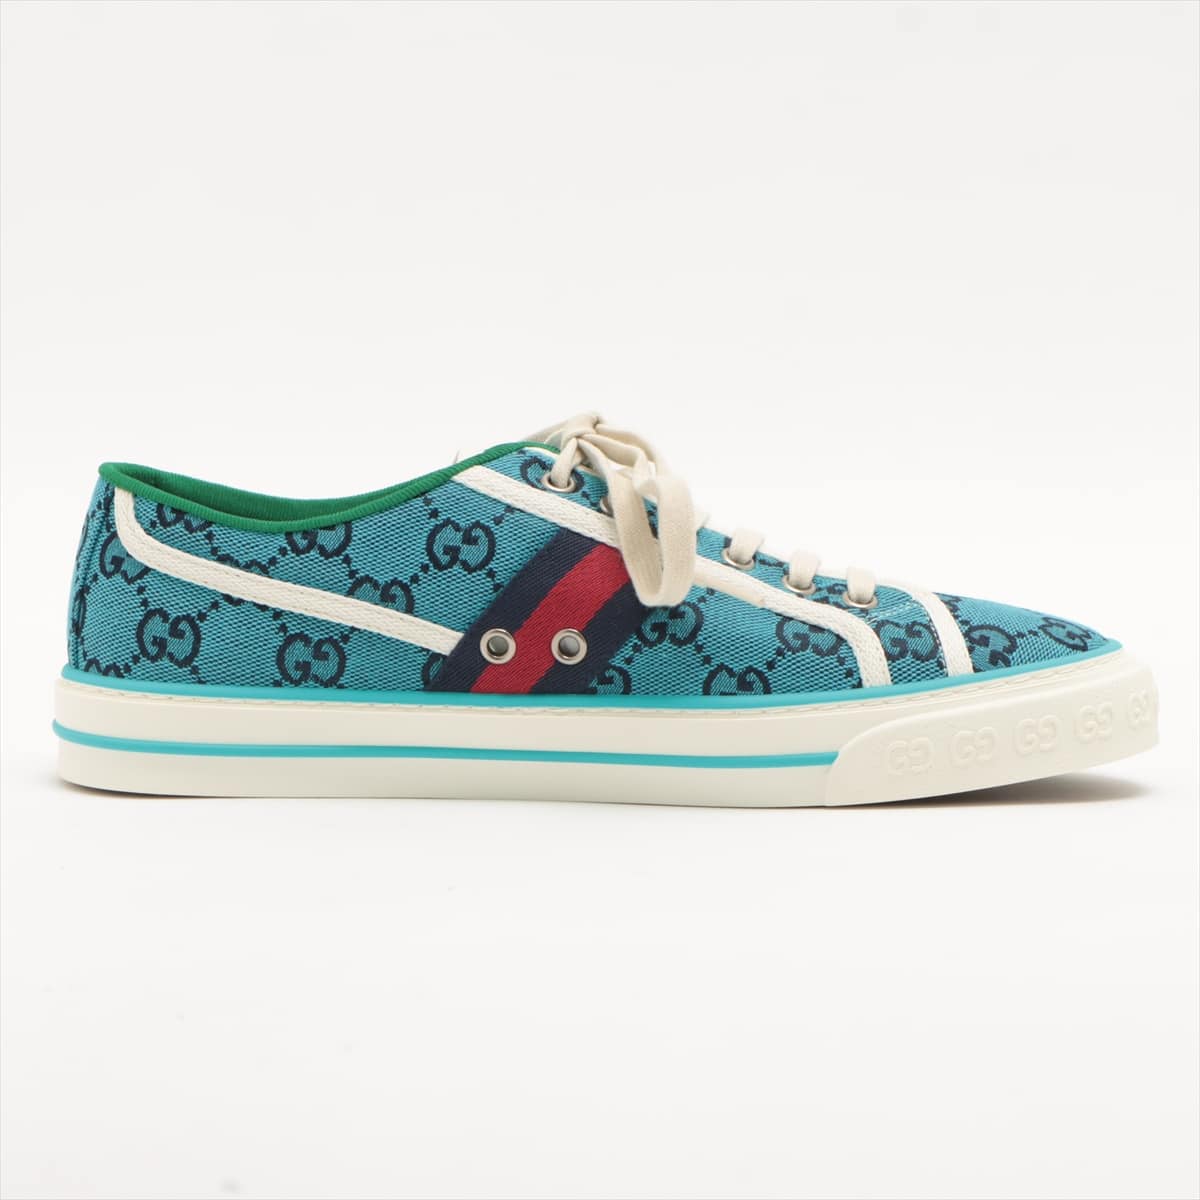 Gucci GG Canvas canvass Sneakers 6+ Men's Blue Tennis 1977 There is a box